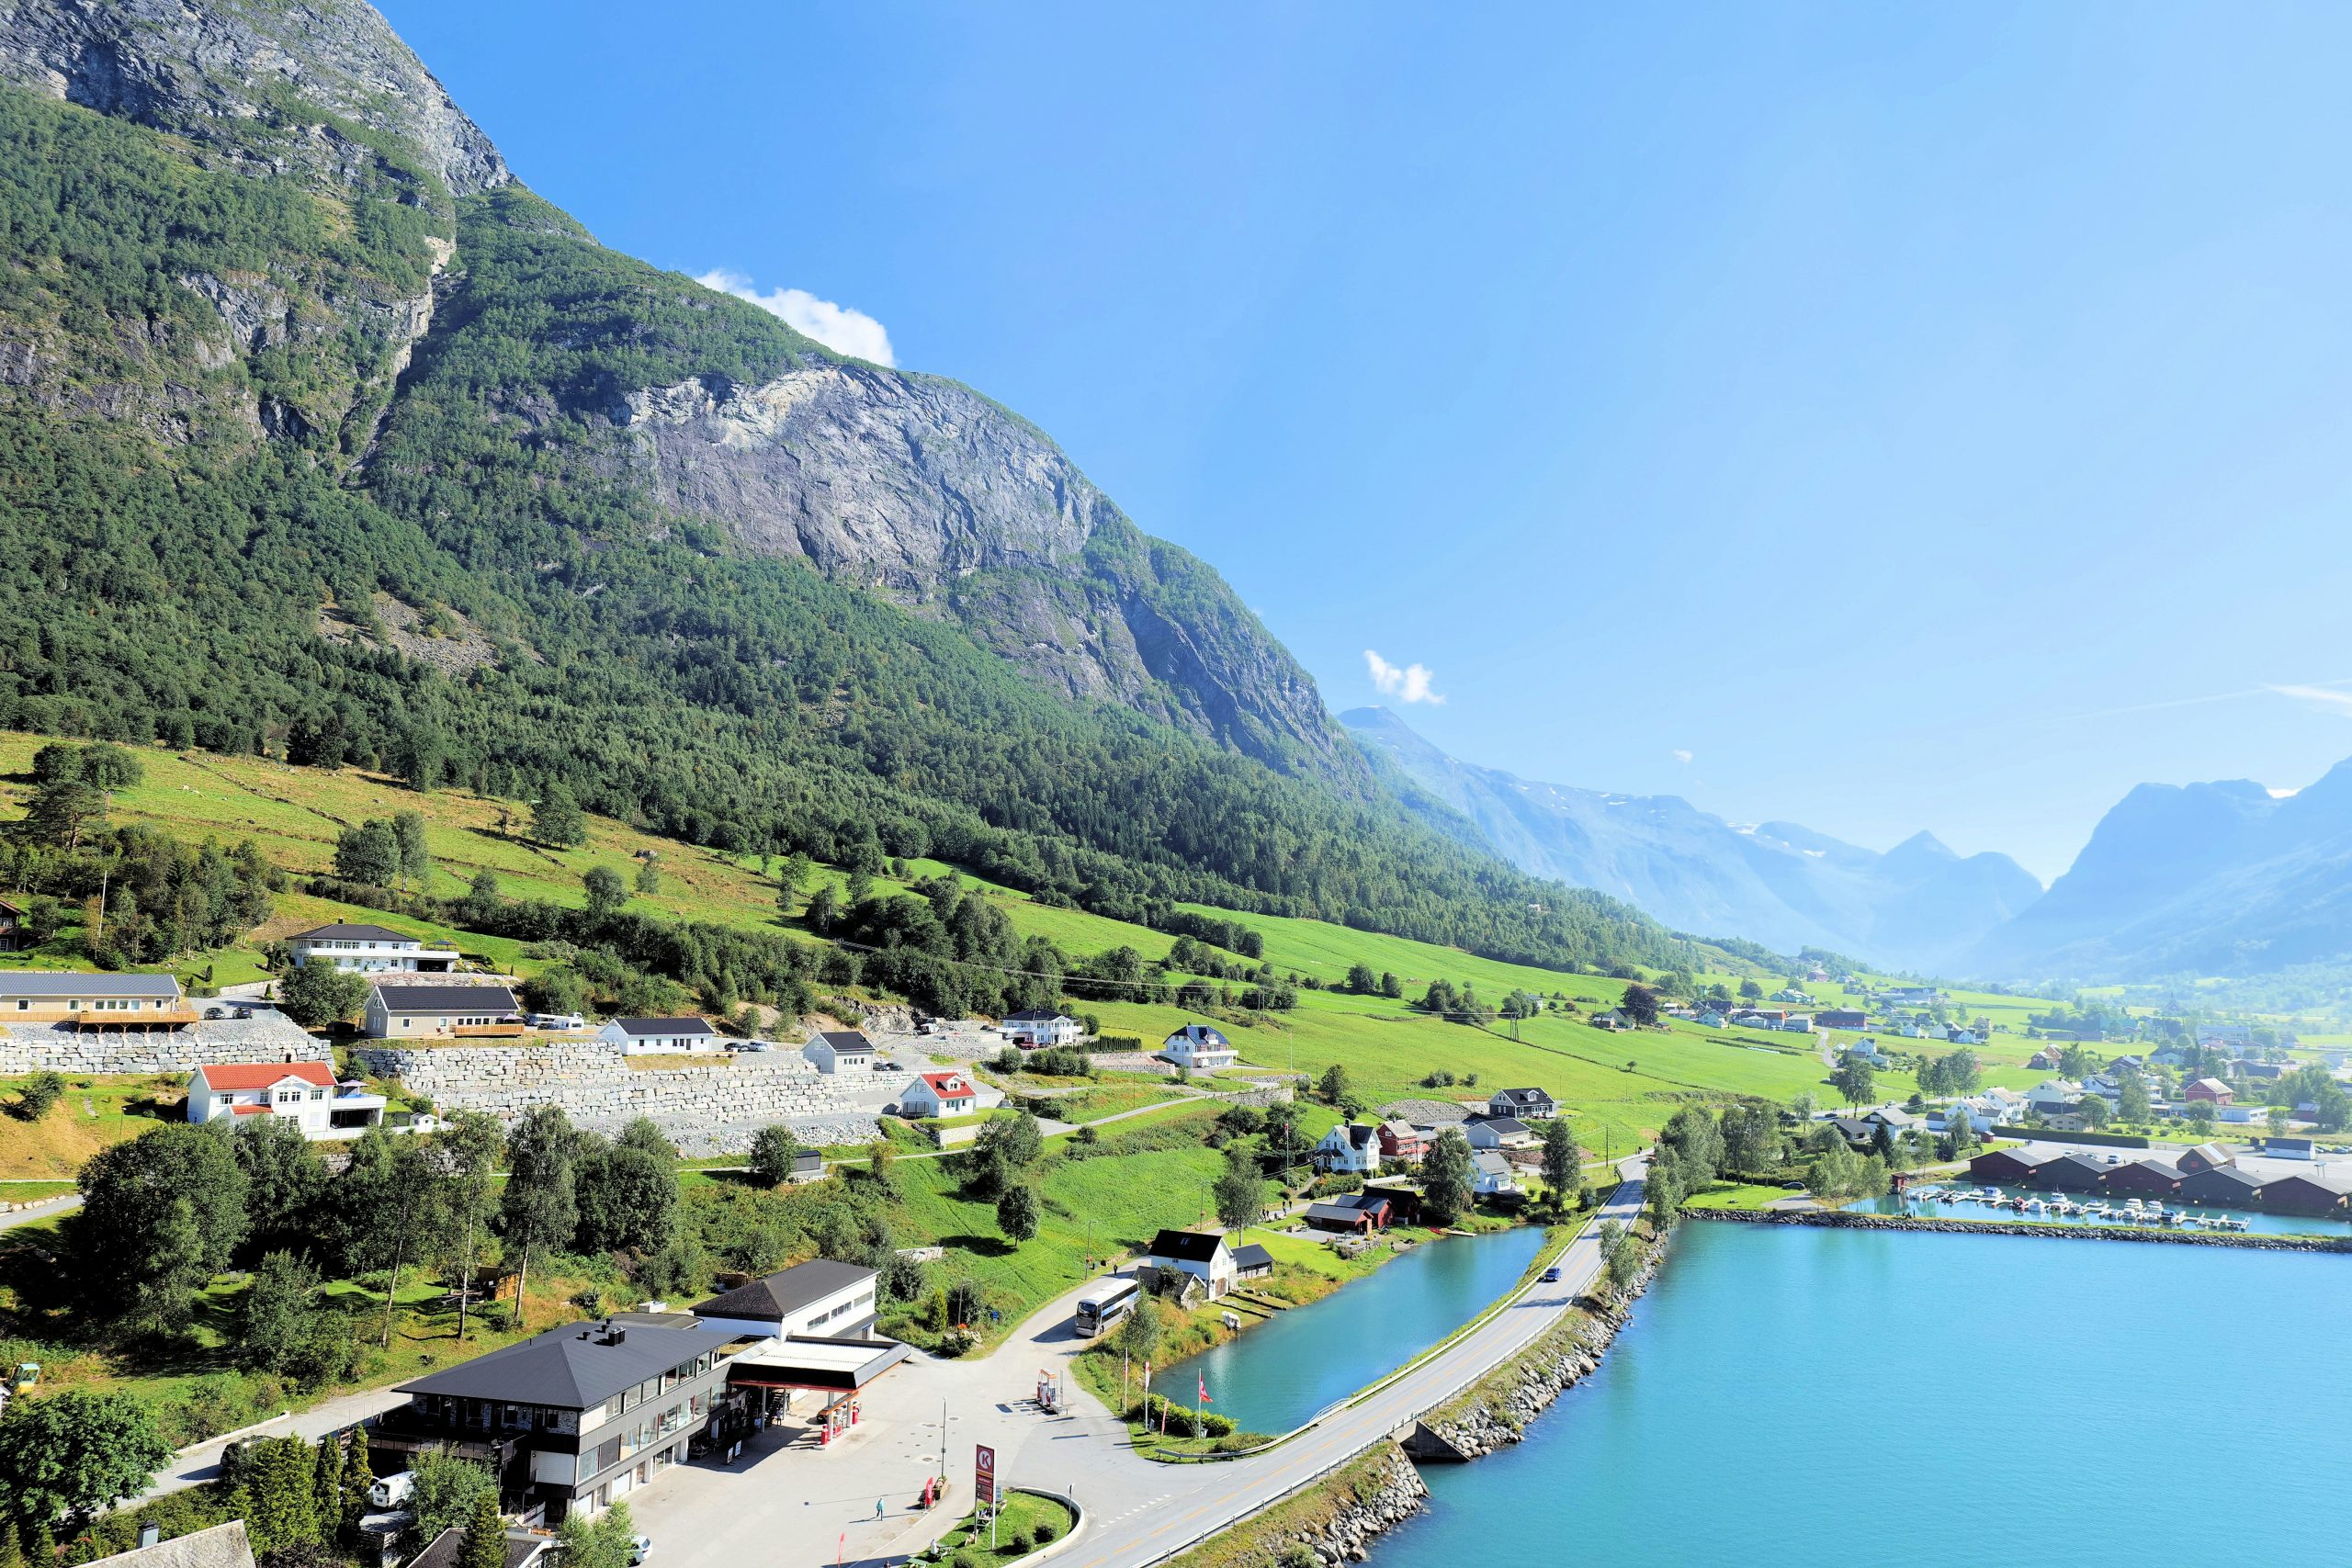 explore the majestic norwegian fjords and experience the breathtaking beauty of norway's rugged coastline.